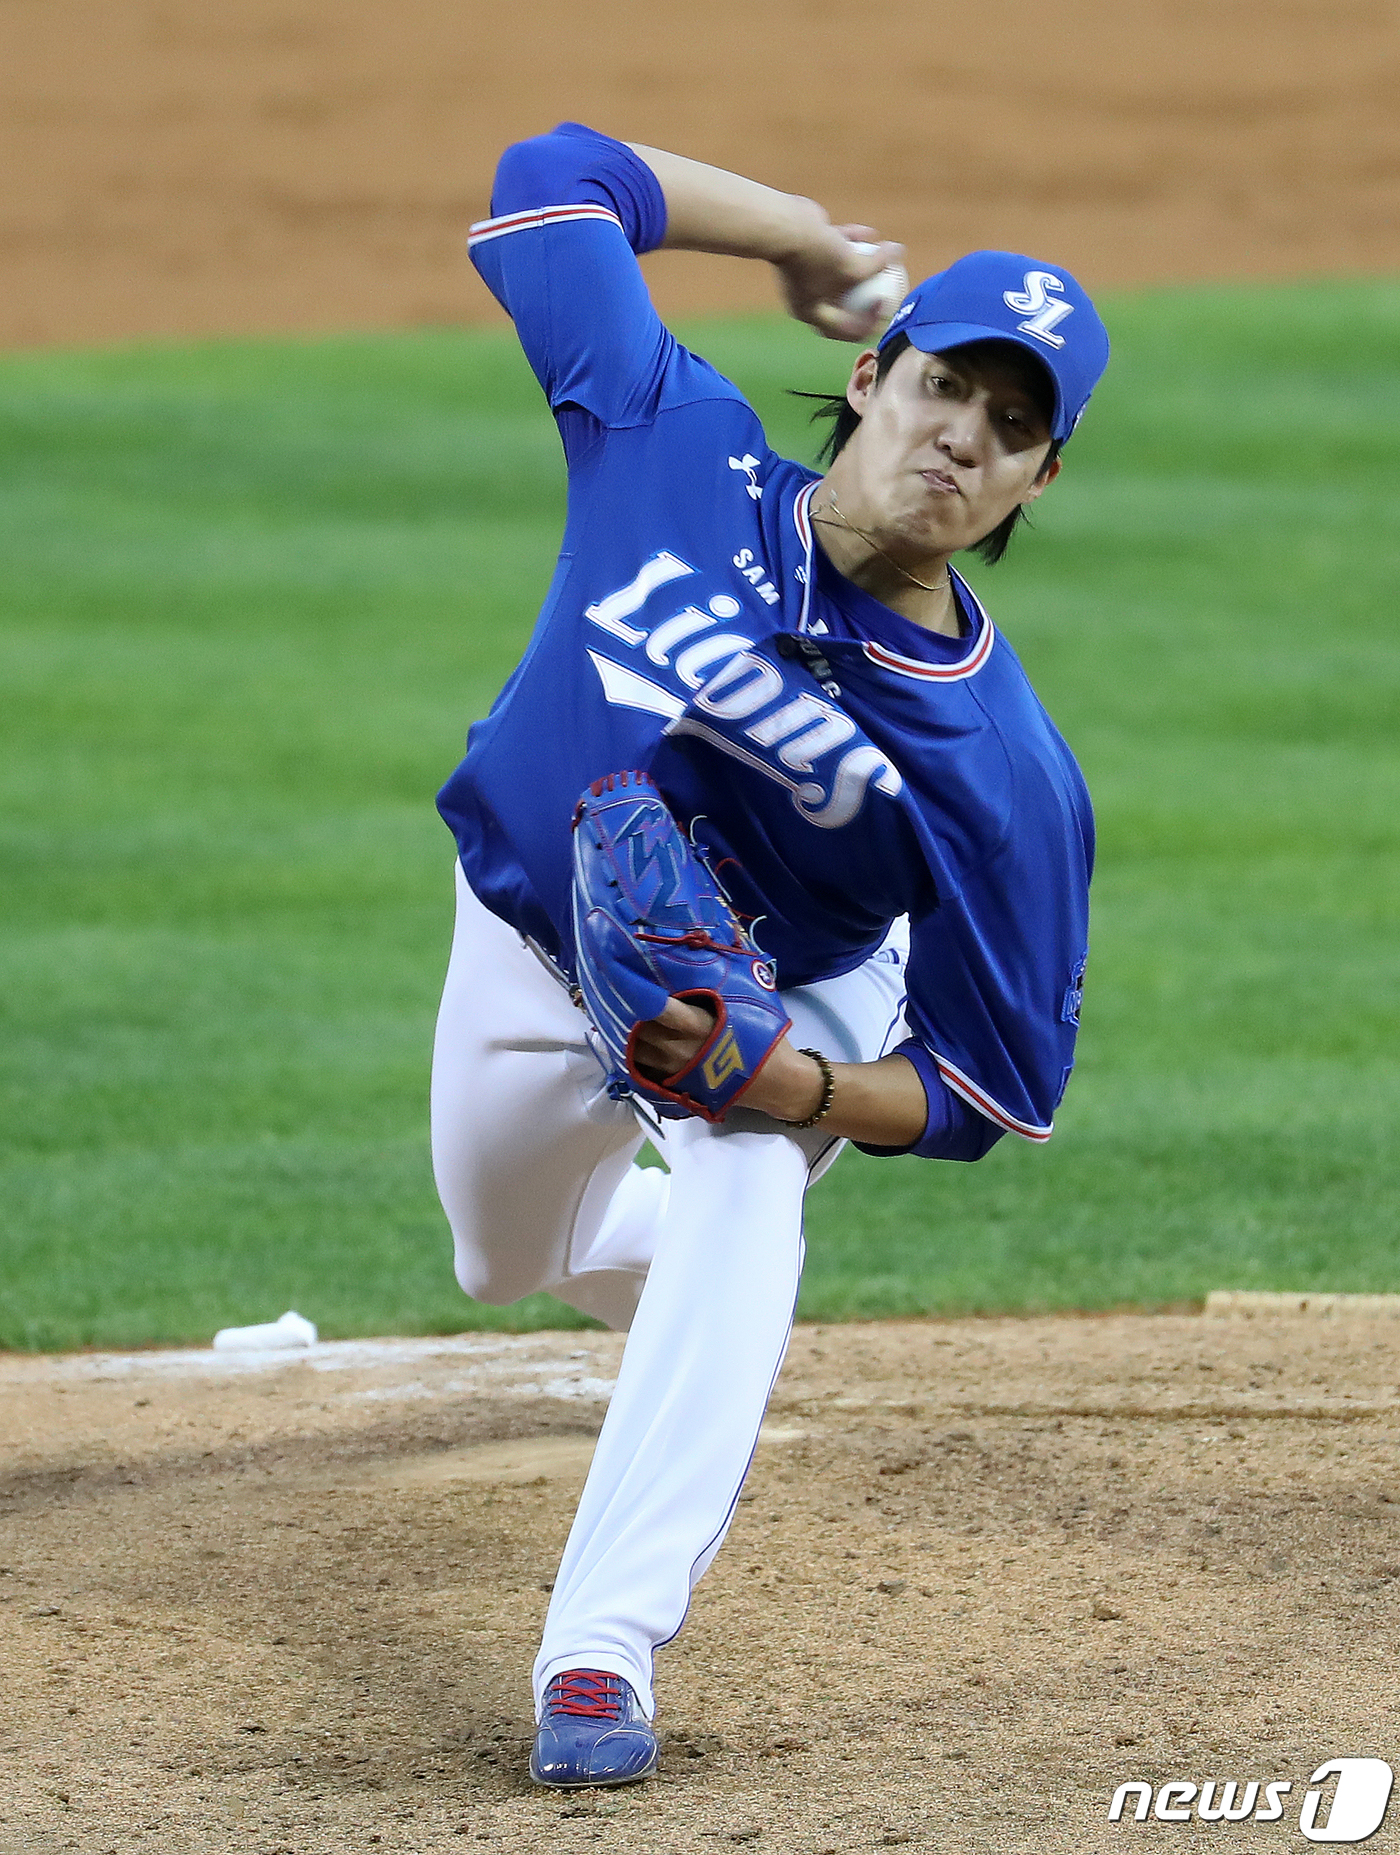 Won Tae-in and Lee Min-ho came out as Cole Hamels as Samsung Lions and LG played the fourth leg of the 2020 Shinhan Bank SOL KBO League season at Seoul Jamsil Stadium on the 2nd.Won Tae-in and Lee Min-ho, a high school graduate in the second year of high school, also played in the Deagu Samsung Lions Park on the 21st of last month.Lee Min-ho scored 513 innings, 1 hit, 4 walks, 2 strikeouts, and scored the first win of the season and the joy of his first professional debut.Won Tae-in also pitched well with two runs in seven innings, six hits, two walks and six strikeouts, but saw the bitter taste of defeat due to the silence of the team.After 12 days, the confrontation was again concluded. The place was moved to Seoul Jamsil Stadium, not Deagu.On the day, the two men played a well-played relay as if proving that the last start was not a coincidence. Won Tae-in scored five hits in seven innings, three strikeouts and three strikeouts.Lee Min-ho also gave up five hits and two walks in seven innings, but allowed only two runs while striking out seven.As the Samsung Lions are 2-0 ahead of LG in the eighth inning, Won Tae-in will win three wins (1 loss) in the season and Lee Min-ho will lose one loss (1 win) in the season.Lee Min-ho didnt catch the early feeling: The start of bad luck was that he was hit in an exquisite position in front of right fielder Kim Sang-soo, the leading hitter in the first inning.After sending Park Chan-do out on the walk, Saladino allowed a two-run timely hit to fall deep into the left-field left fence.Saladino was tagged In-N-Out Burger after running to third base.Danger felt so bad that catcher and pitcher coach came on the mound once, but he finished the first inning with two subsequent batters in-N-Out Burger without additional runs.The struggling Lee Min-ho changed the Bunger in the second inning with a three-legged walk; in the third inning, he allowed two hits to go to second and third base Danger, but he stopped it without a run.In the fourth inning, he sent out runners with sasagu, but ended the inning with proper checks. In the fifth inning, he was cleanly in the third inning, and in the sixth inning in the seventh inning.Won Tae-in was also tough, starting well with a third-inning run in the first inning, and Kim Min-sung hit a double in the second inning, but quickly caught a follow-up hitter.The third was also easily finished, but the fourth was Danger, who was hit by Lee Chun-woong and Kim Hyun-soo in a row and placed in first and second bases.However, Roberto Ramos struck out, Kim Min-sung and Oh Ji-hwan all managed to stop the ball without a run.Won Tae-in, who was in the momentum, passed the mound with the victory requirement by blocking the LG line without any Danger at the end of the fifth, sixth and seventh innings.7 innings side by side, 2-0 Samsung Lions lead